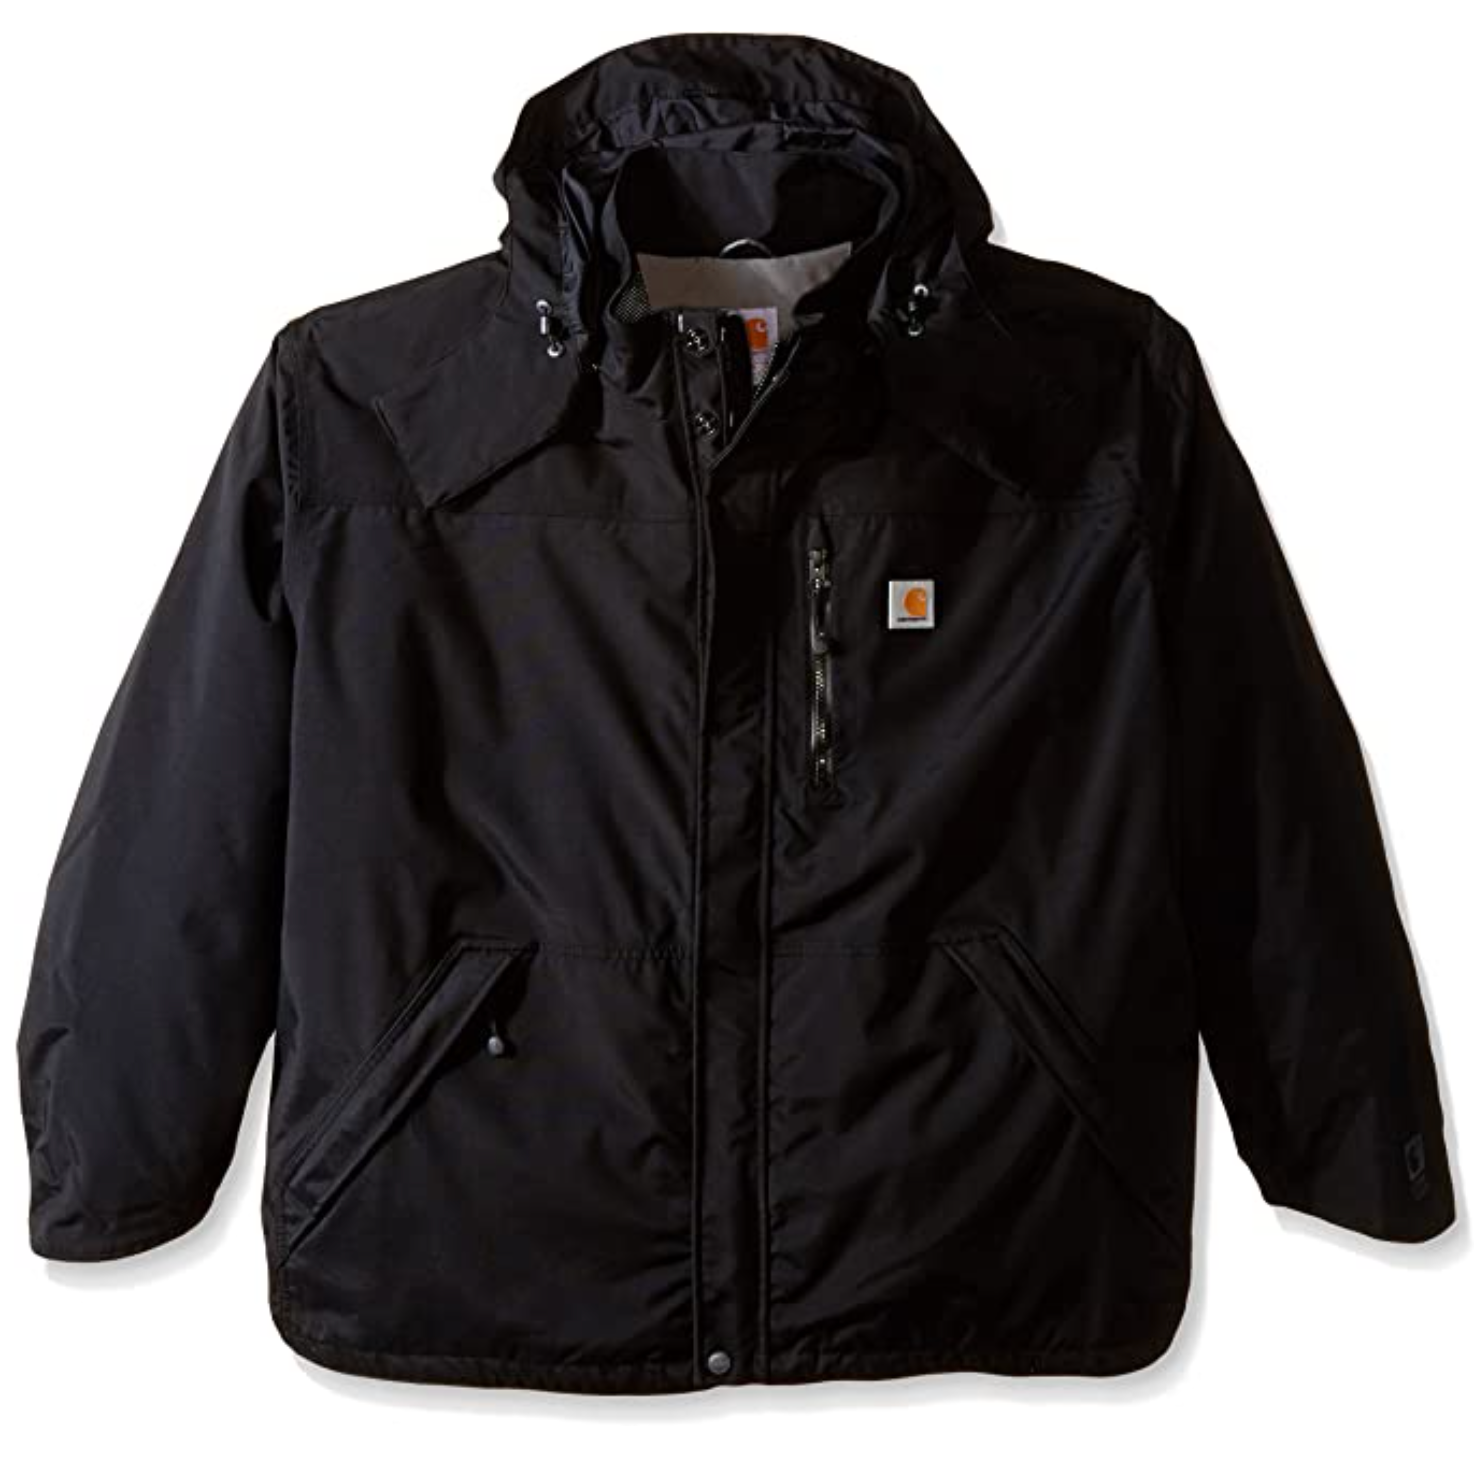 Our favorites: 6 best Carhartt work jackets of 2021 | AGDAILY